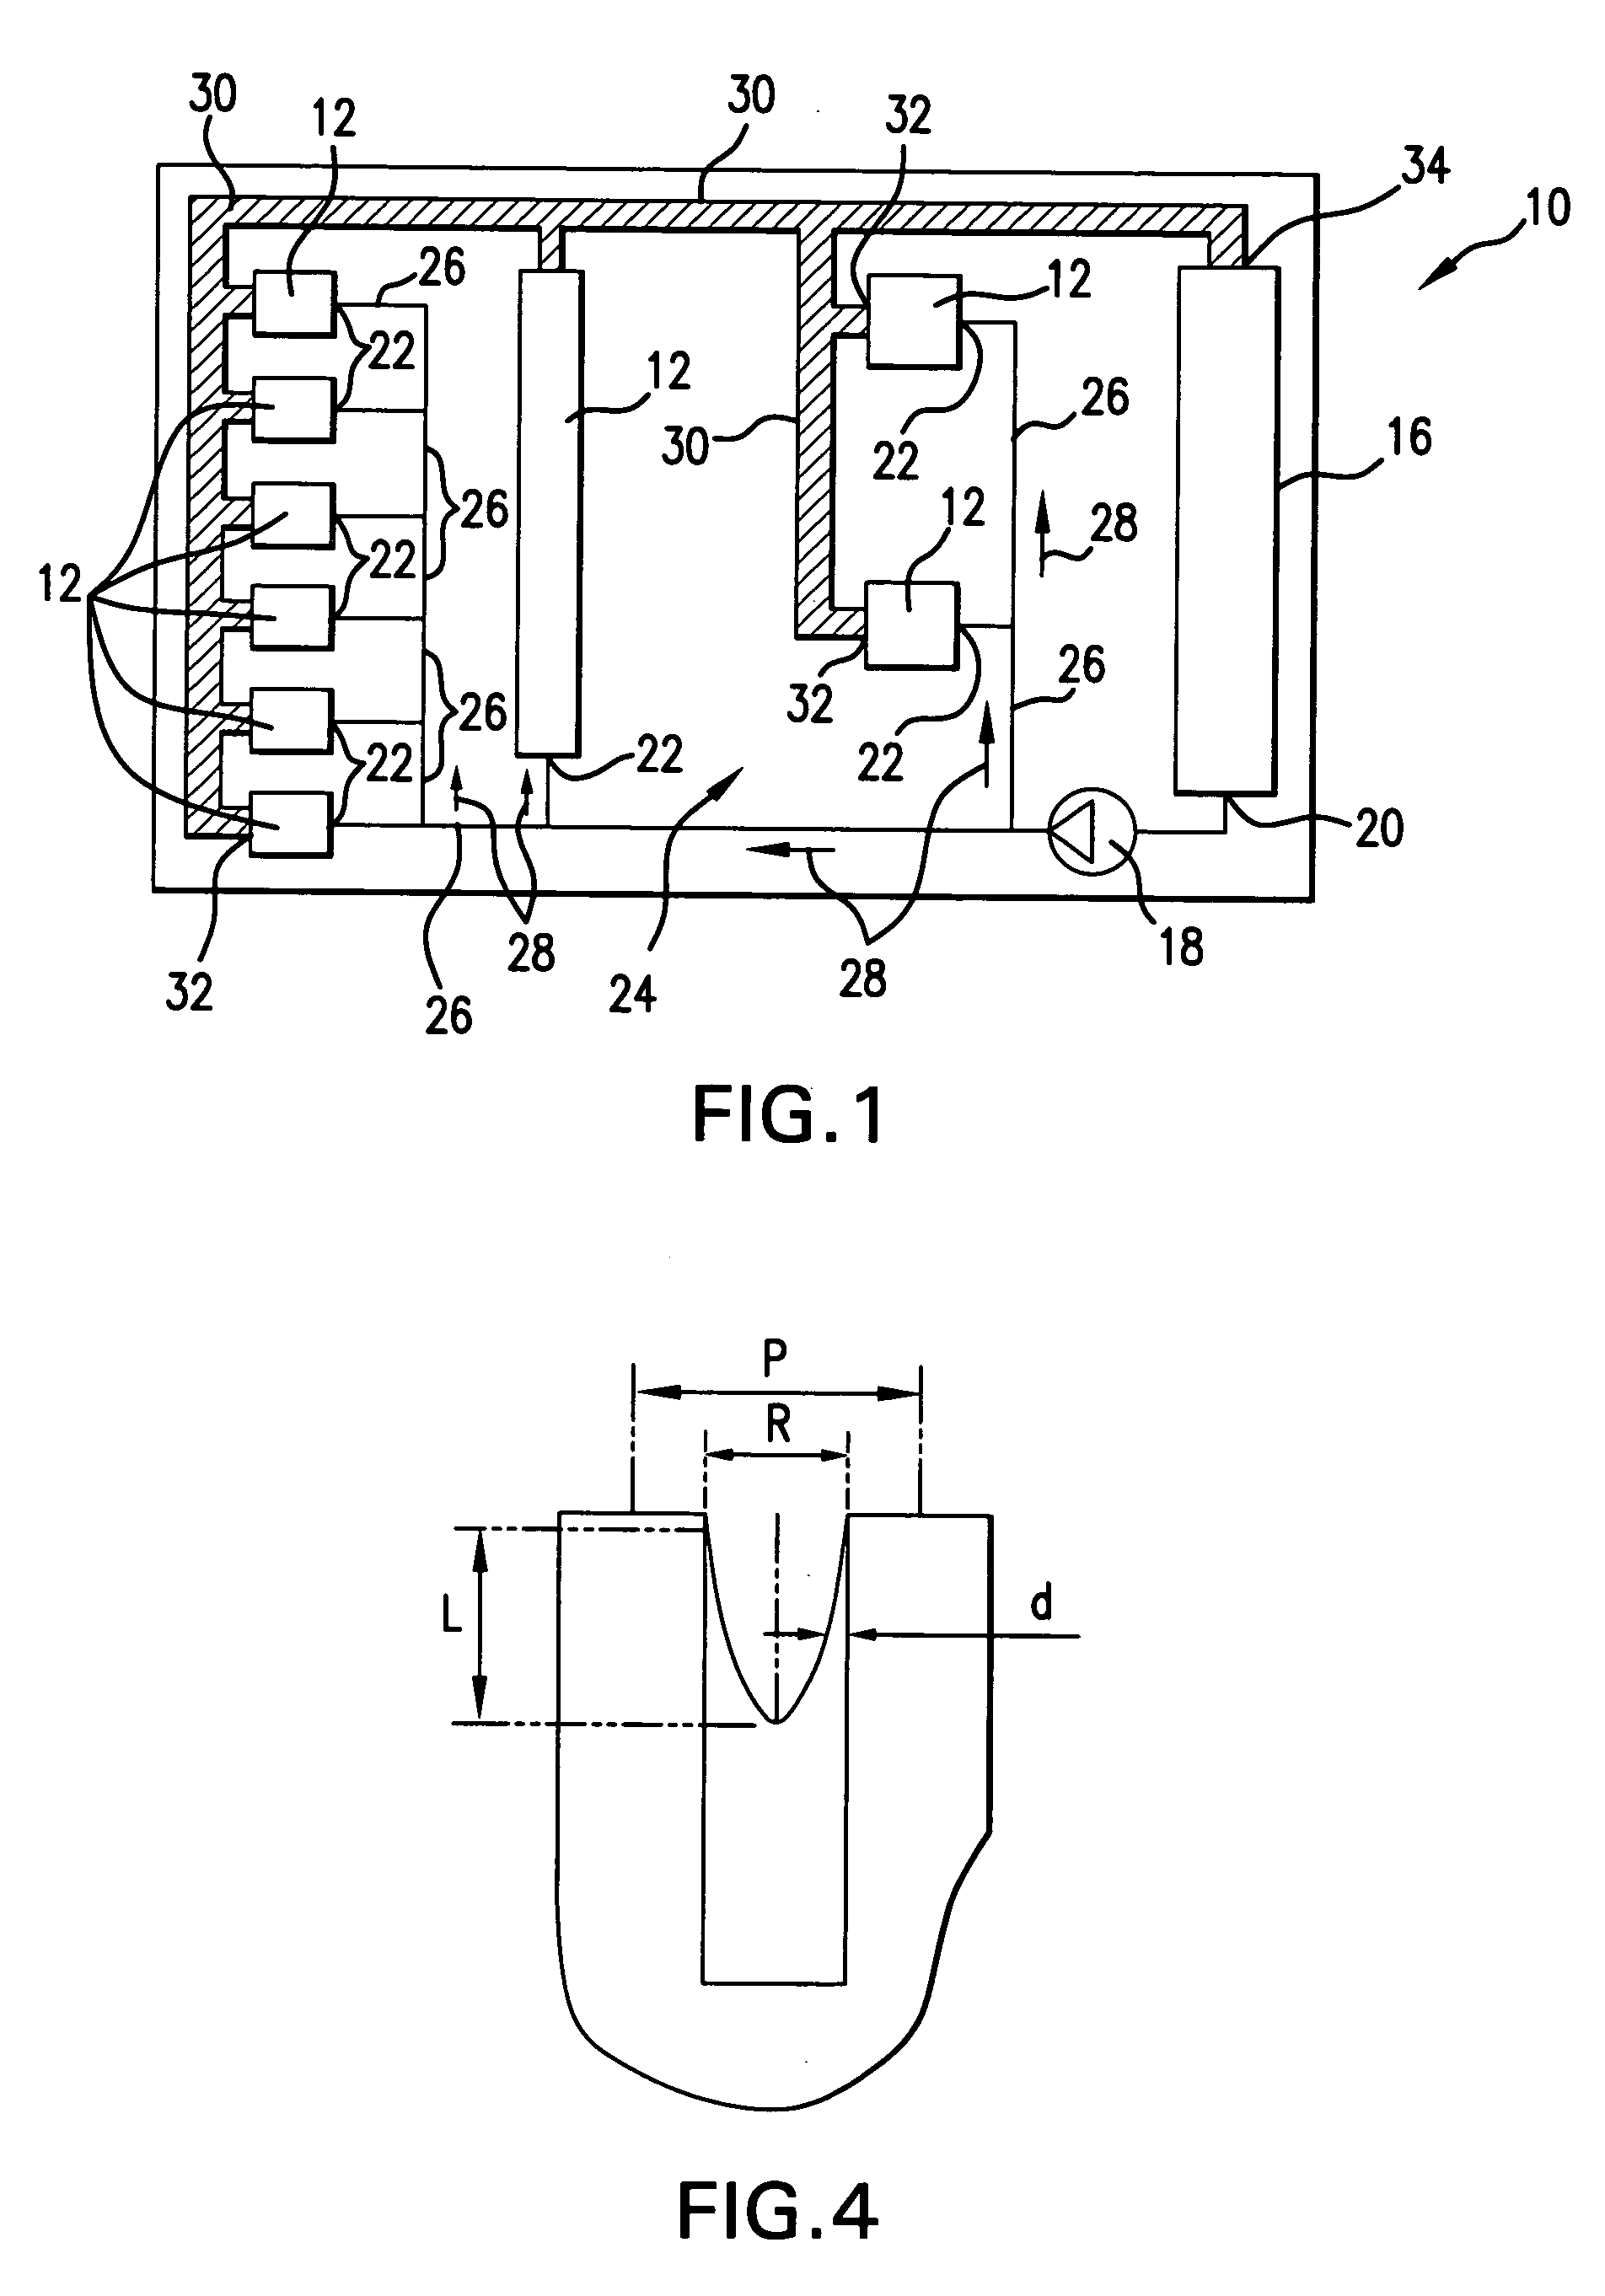 Compact heat exchanging device based on microfabricated heat transfer surfaces